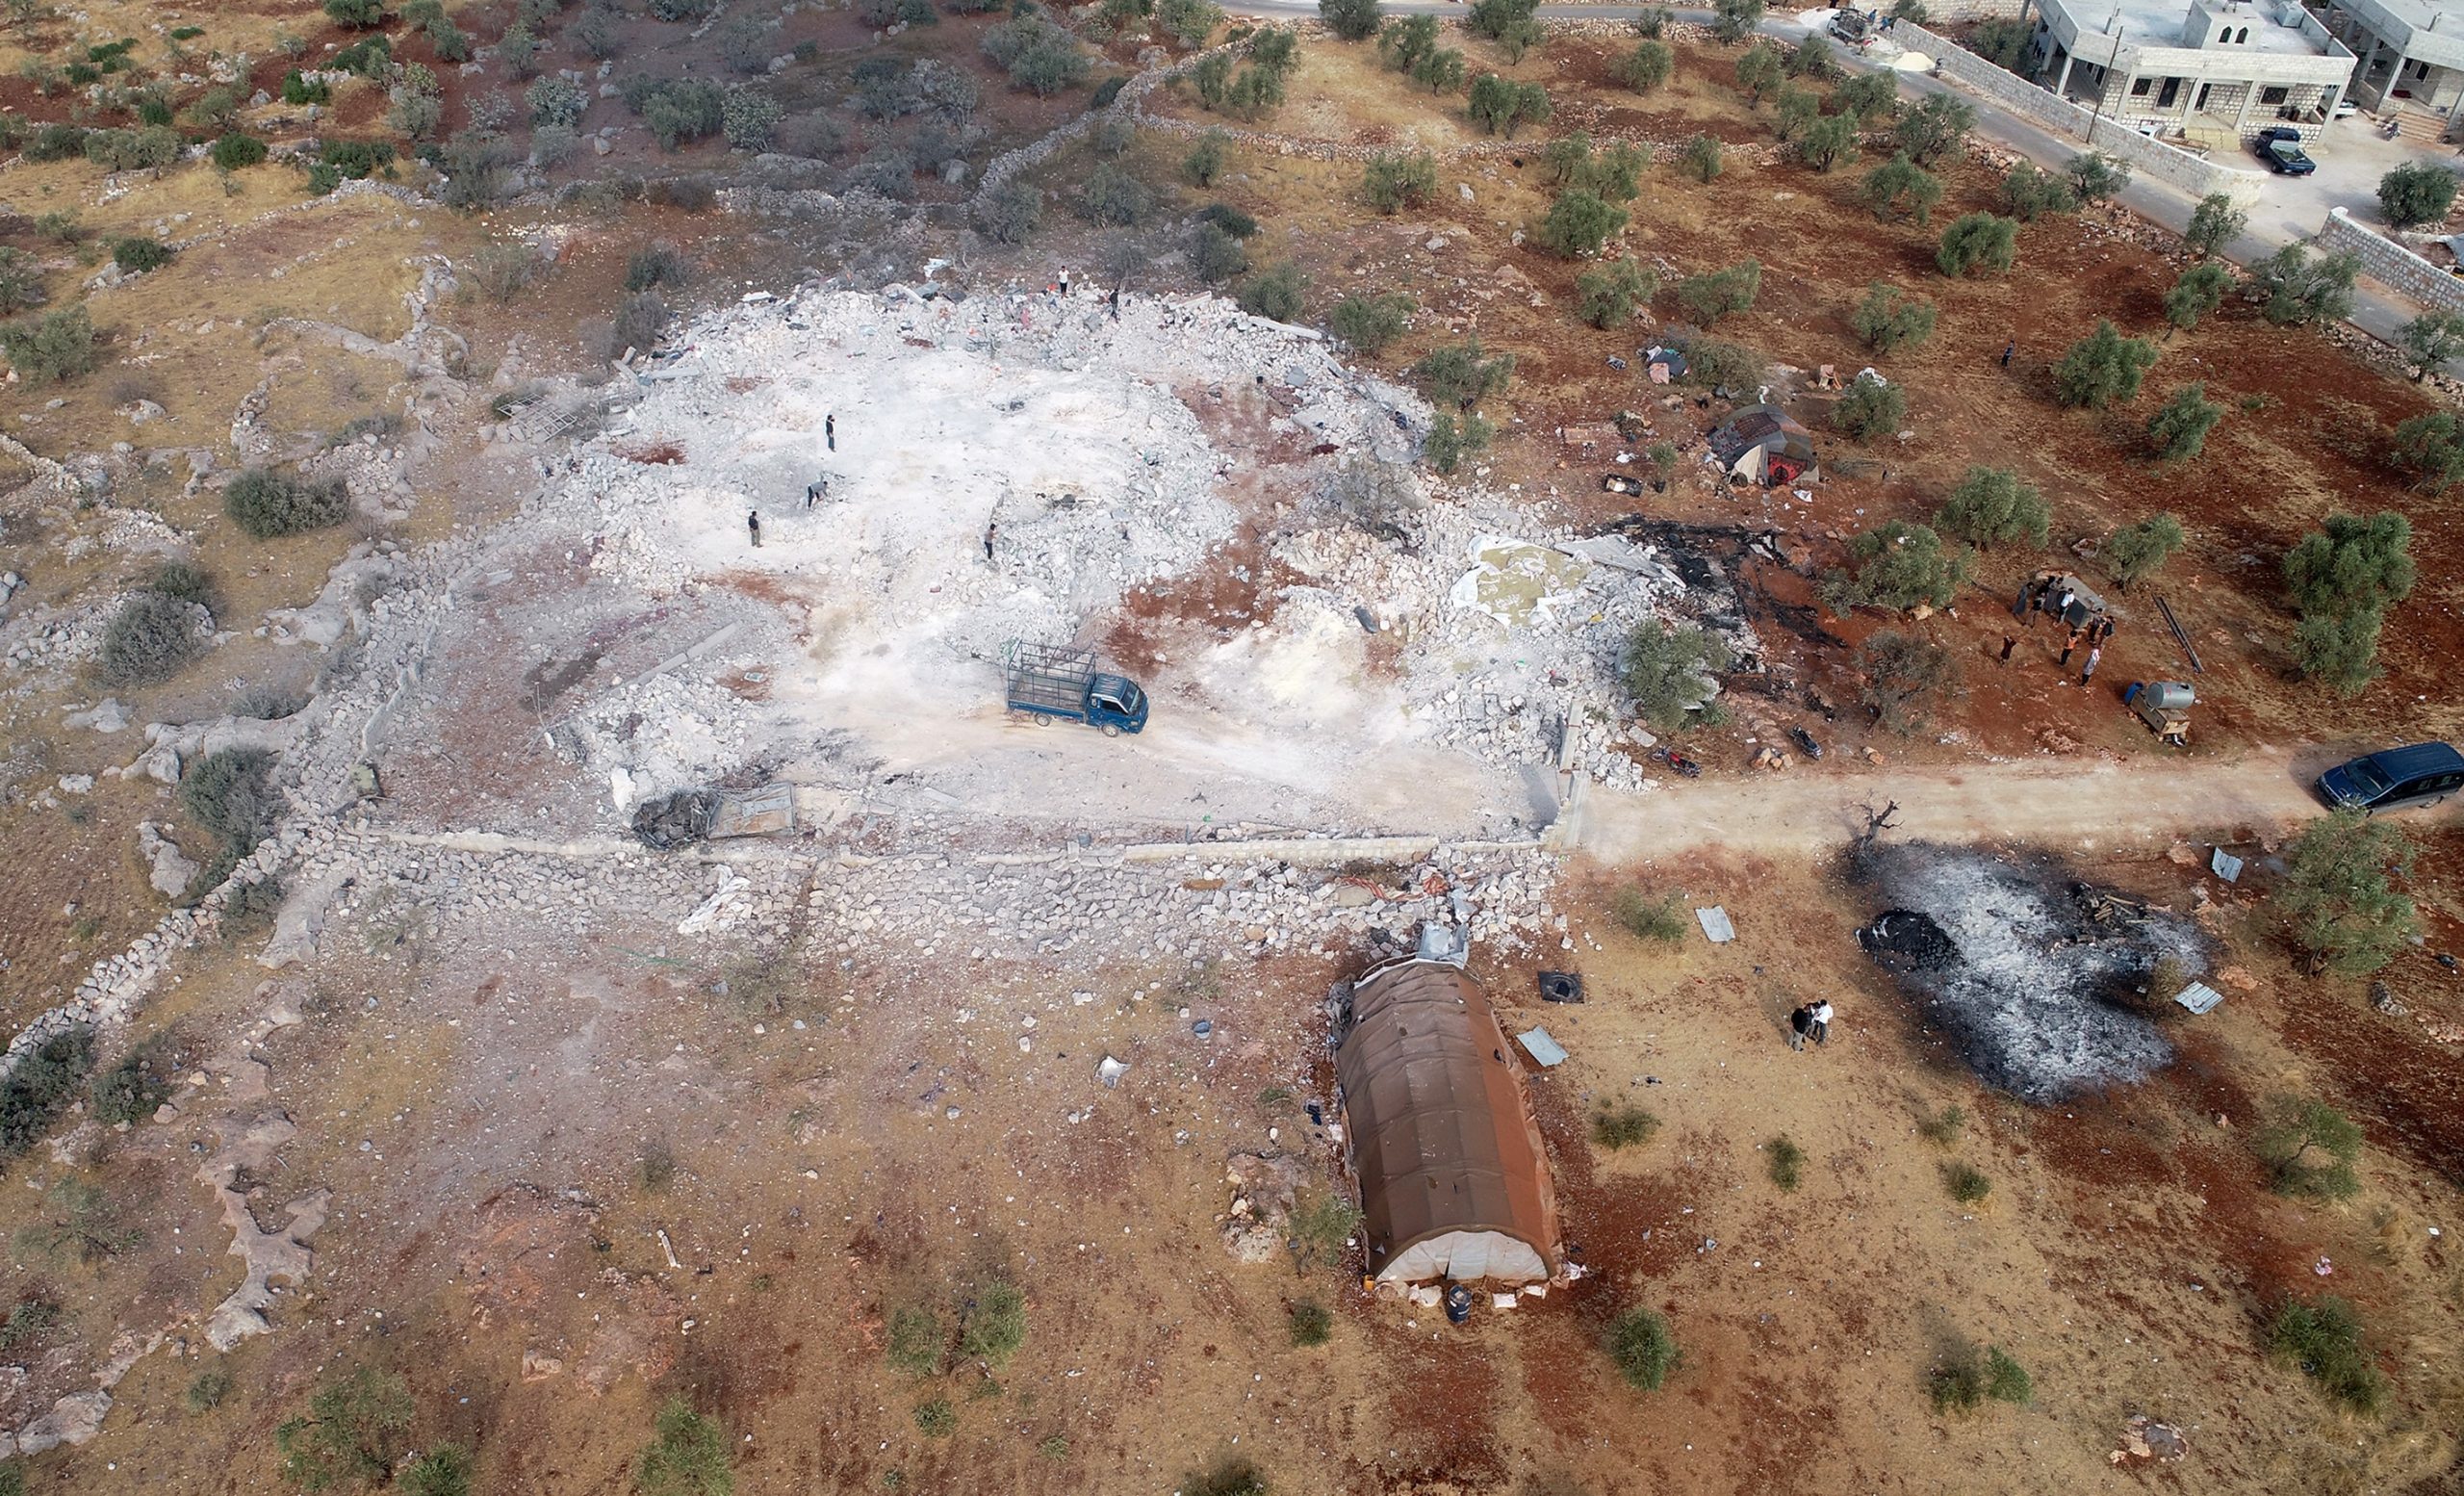 A drone photo shows an aerial view of operation area where ISIS leader Abu Bakr al-Baghdadi died on October 28, 2019 in Idlib, Syria . (Ahmet Weys—Anadolu Agency/Getty Images)